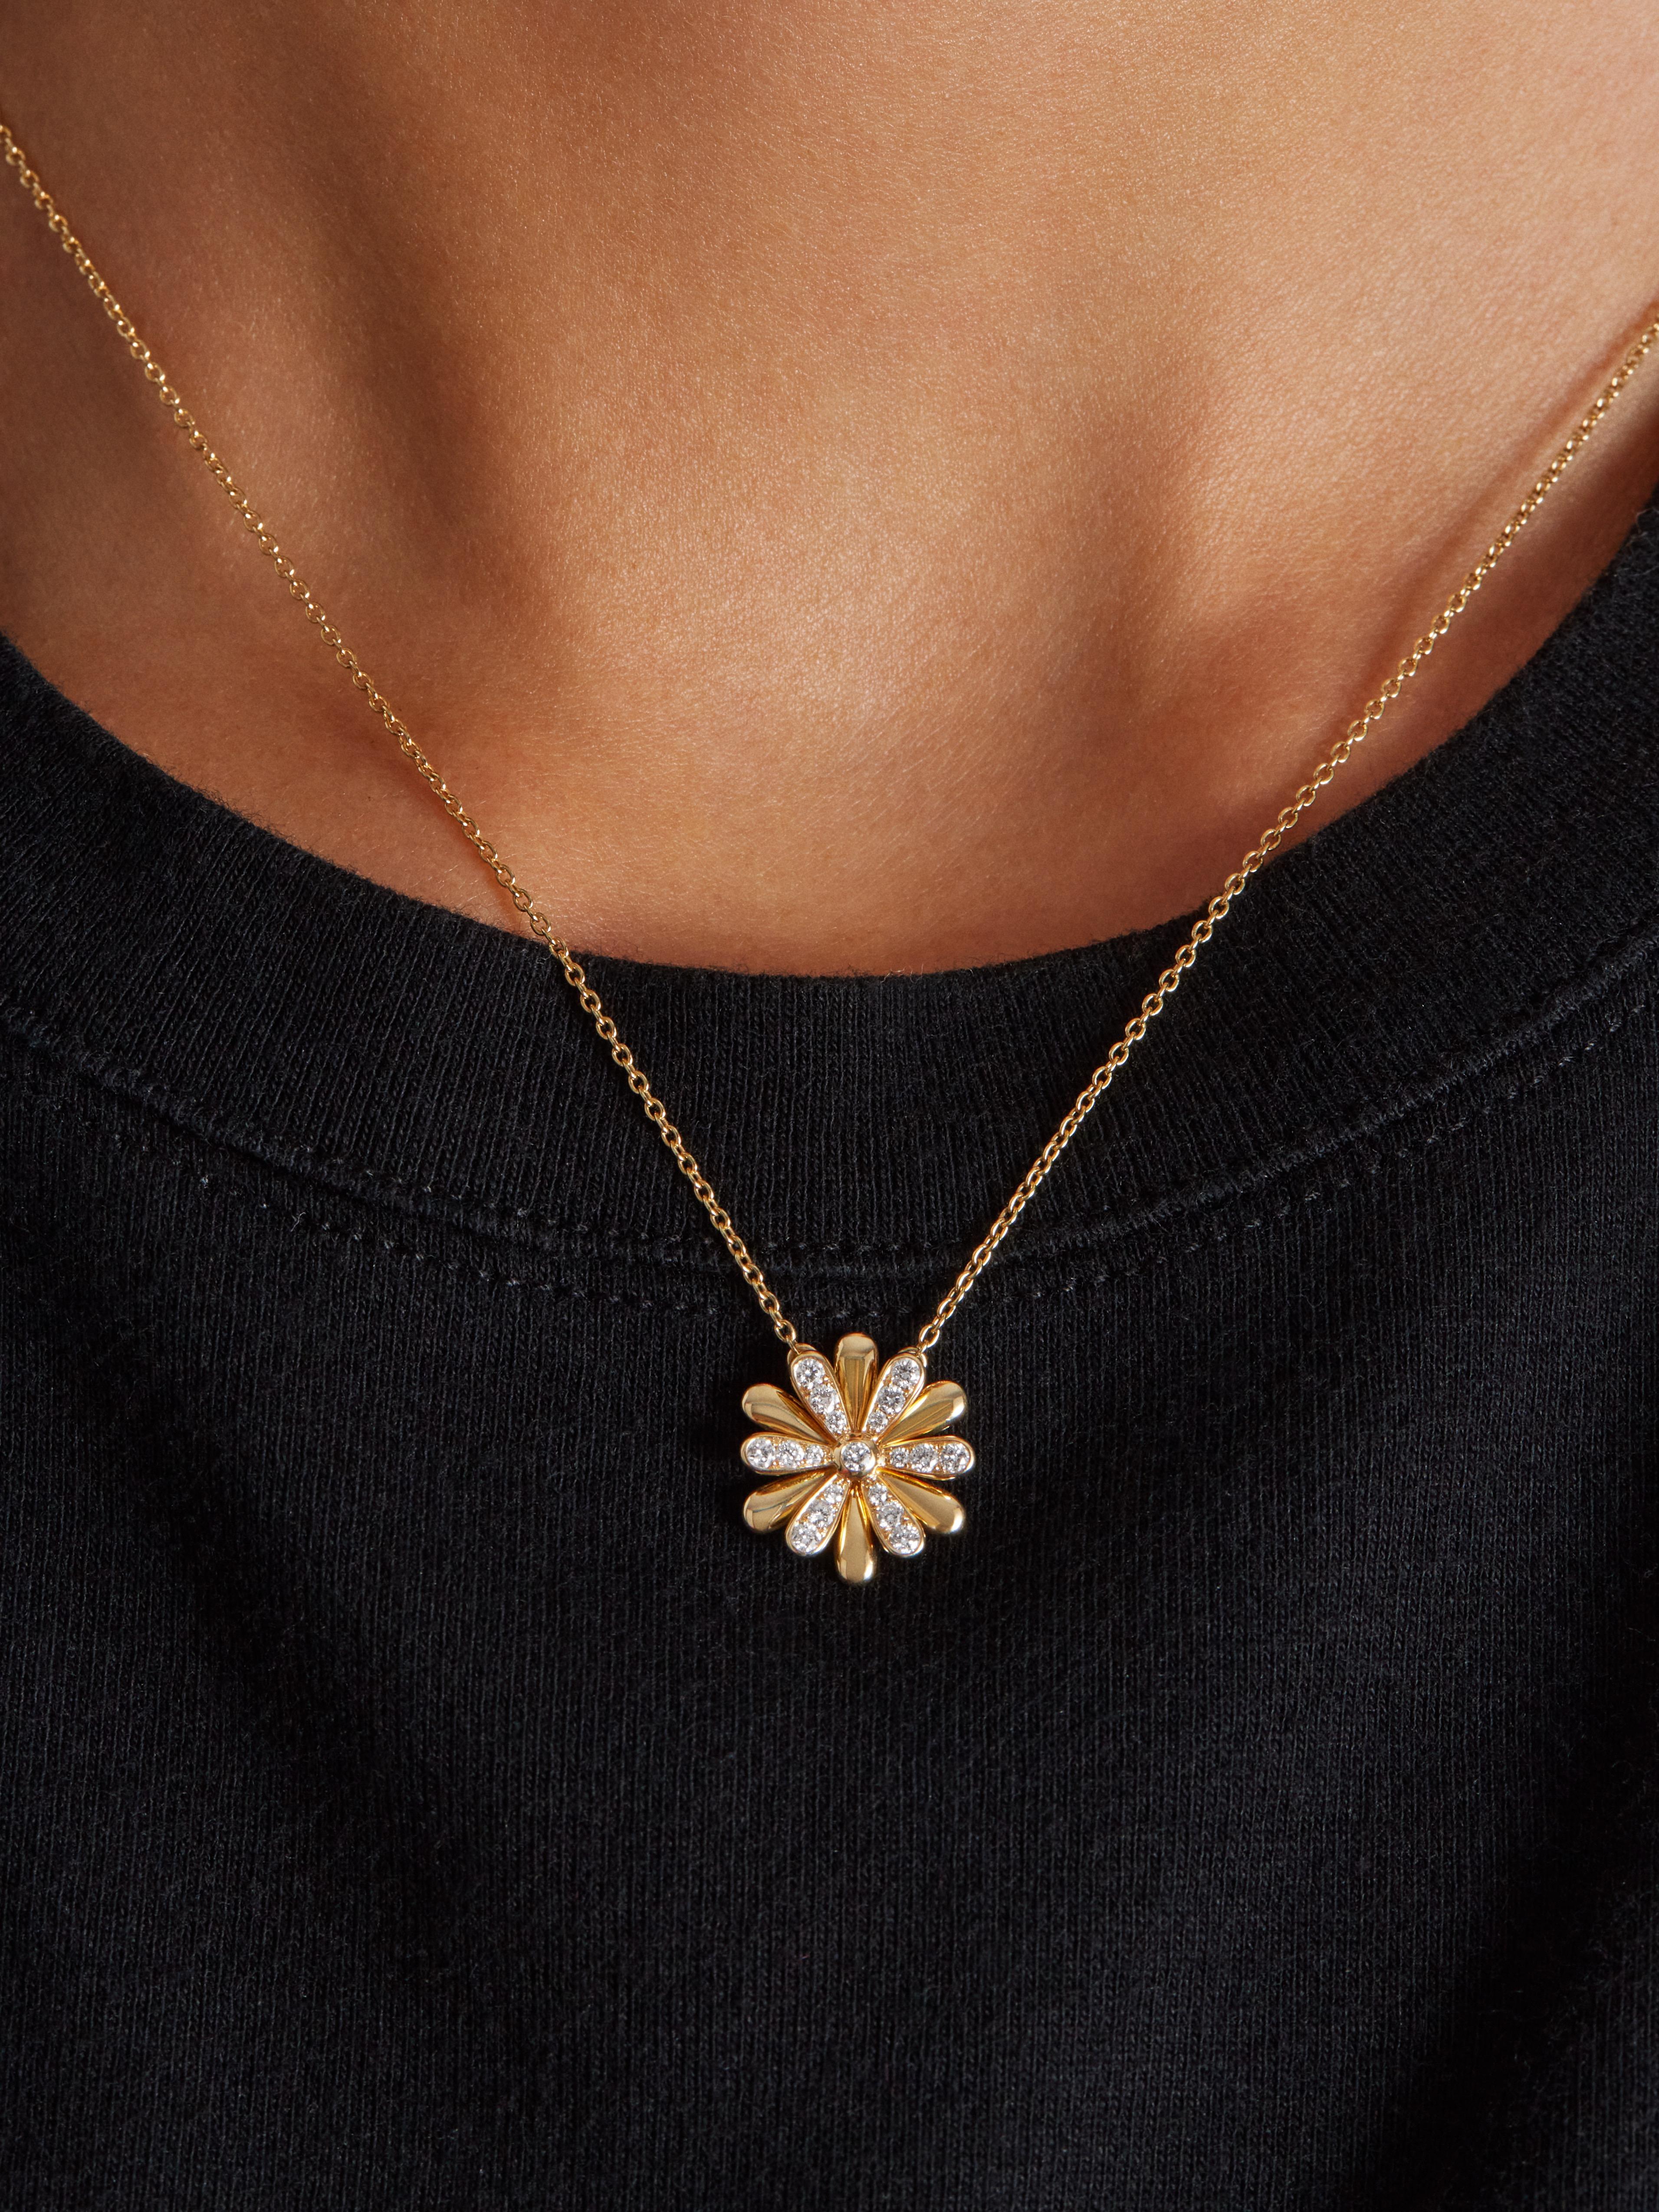 The Flower Poiray collection reflects the elegance and purity of the jeweler's expertise with a diamond-paved version set with a yellow sapphire as well as two semi-paved versions in yellow or white gold.

Gold weight : 5g
Diamonds : 0.28 ct
Chain